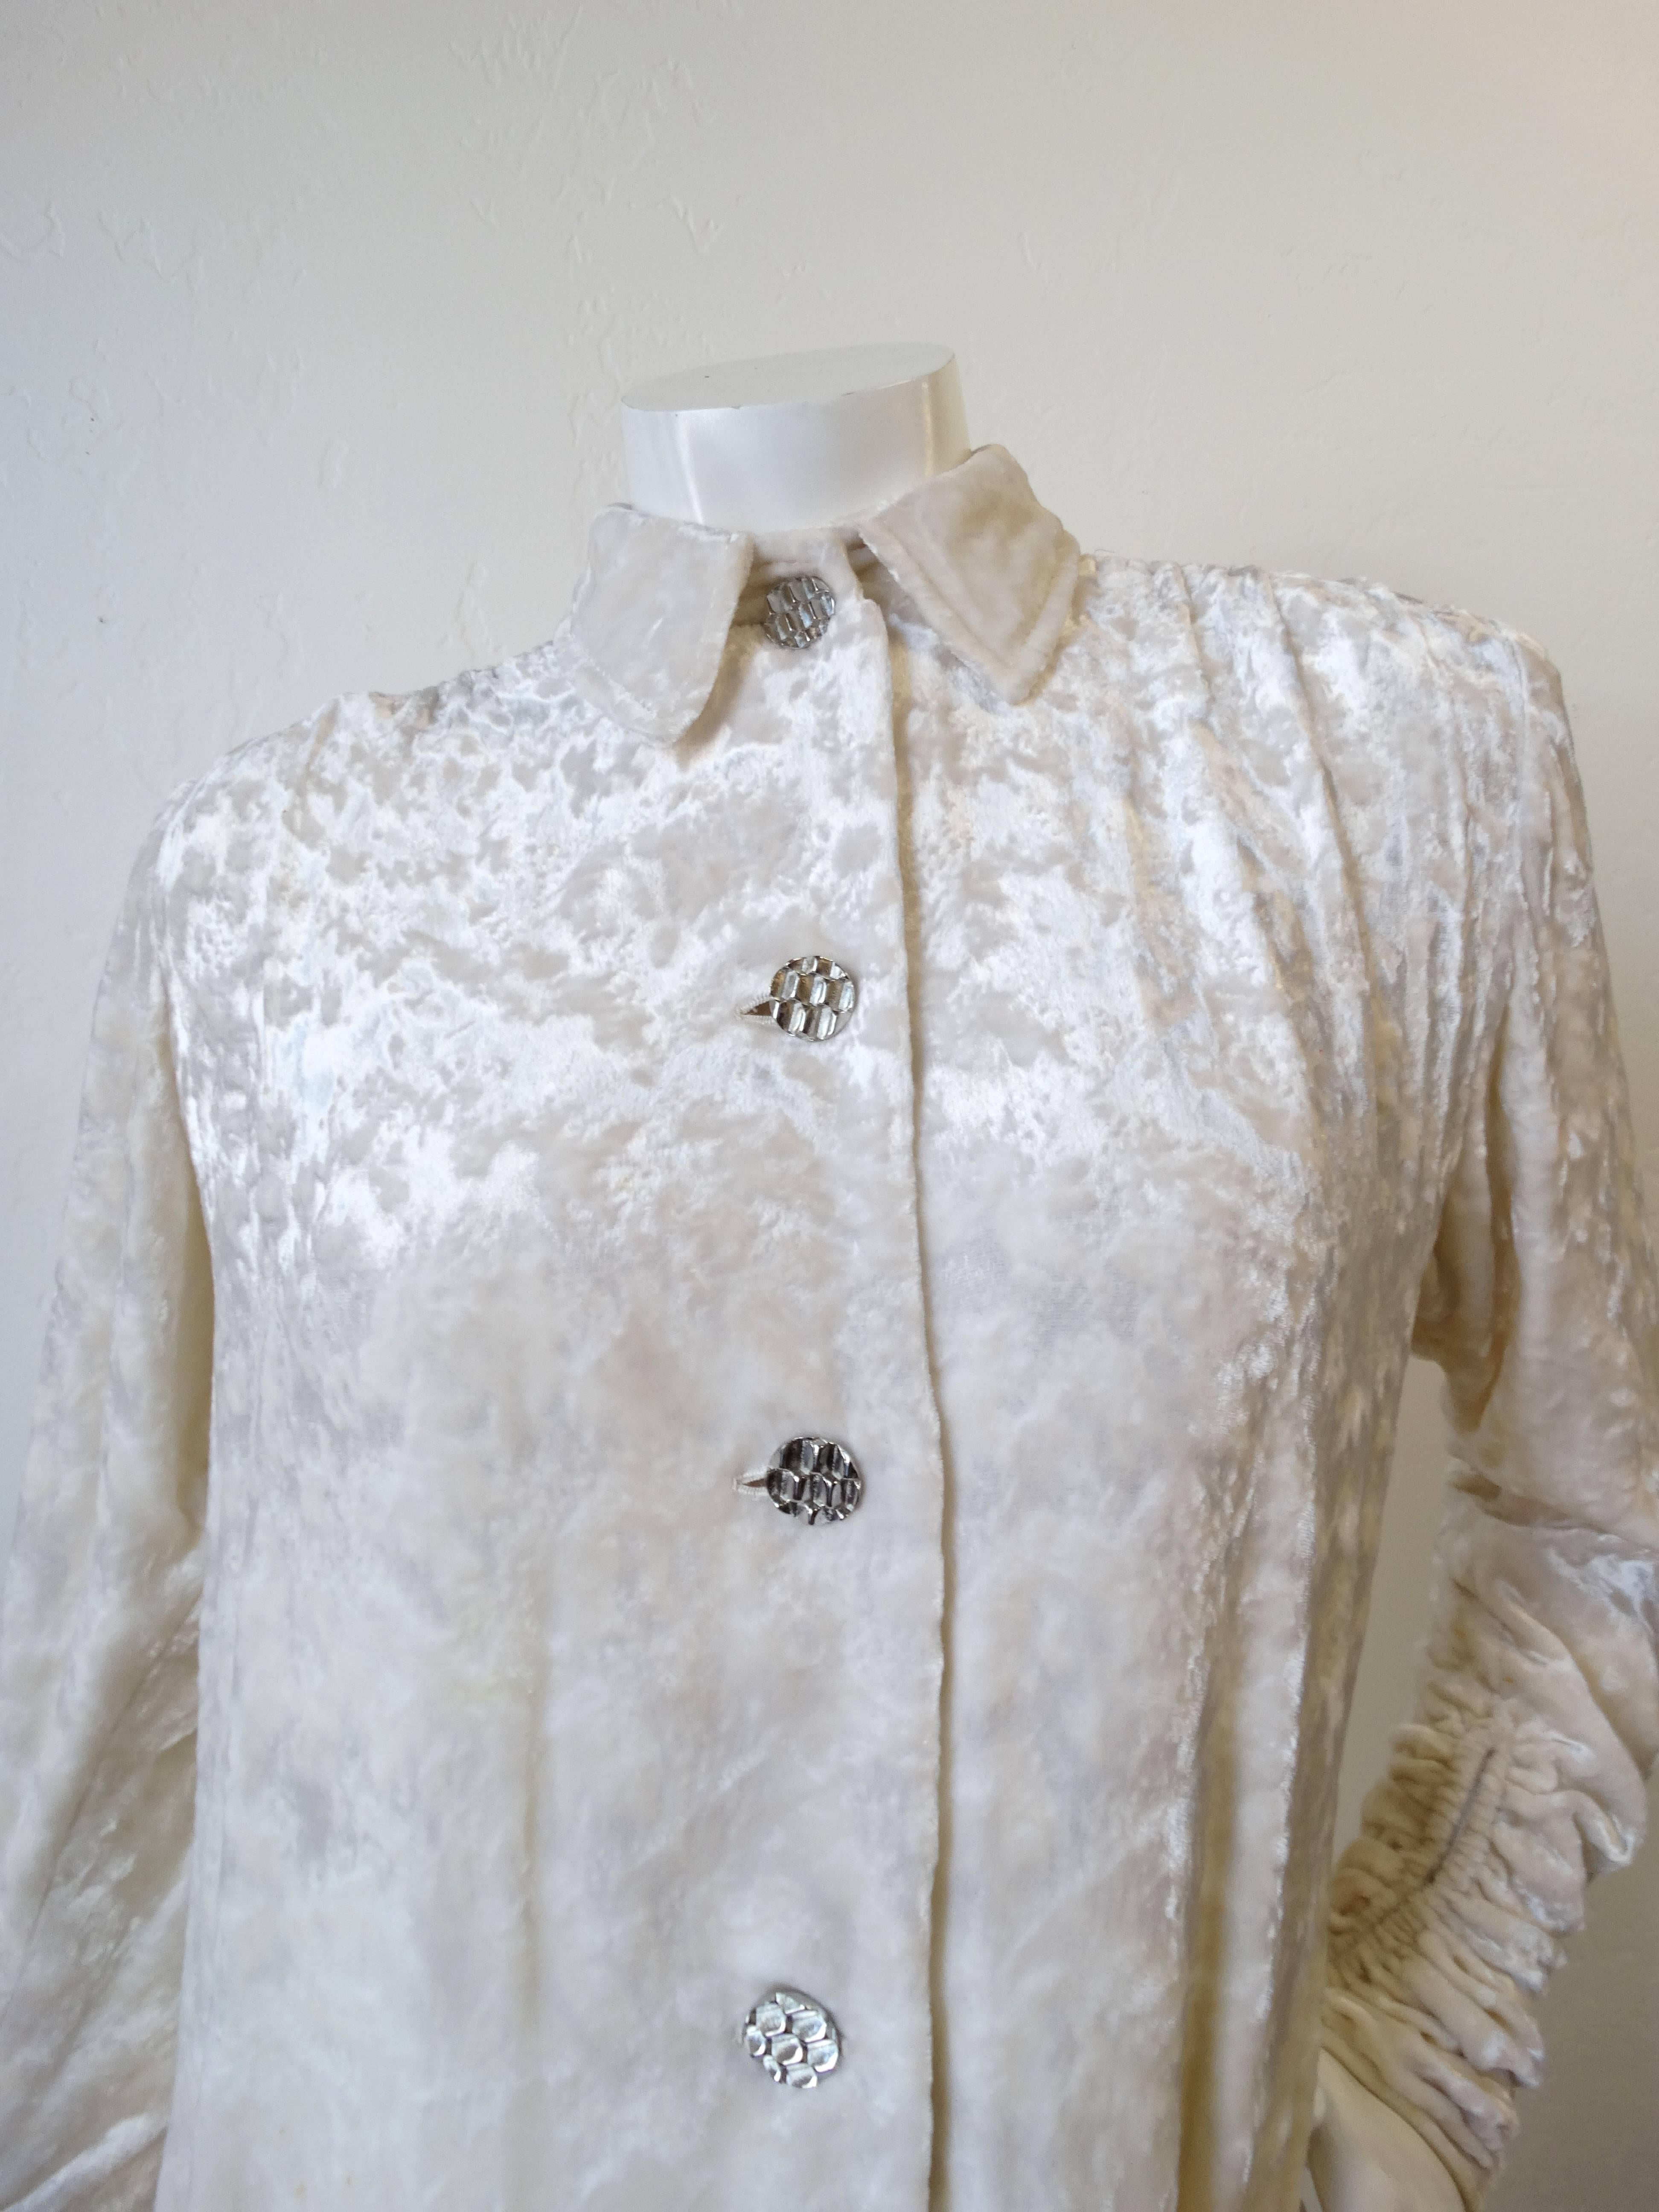 We love a good Galanos- and this piece is no exception! Elevate your next outfit with our amazing 1980s Galanos velvet button down! Rich crushed velvet in a shade of creamy white, contrasted with circular silver buttons. Unique ruched details on the